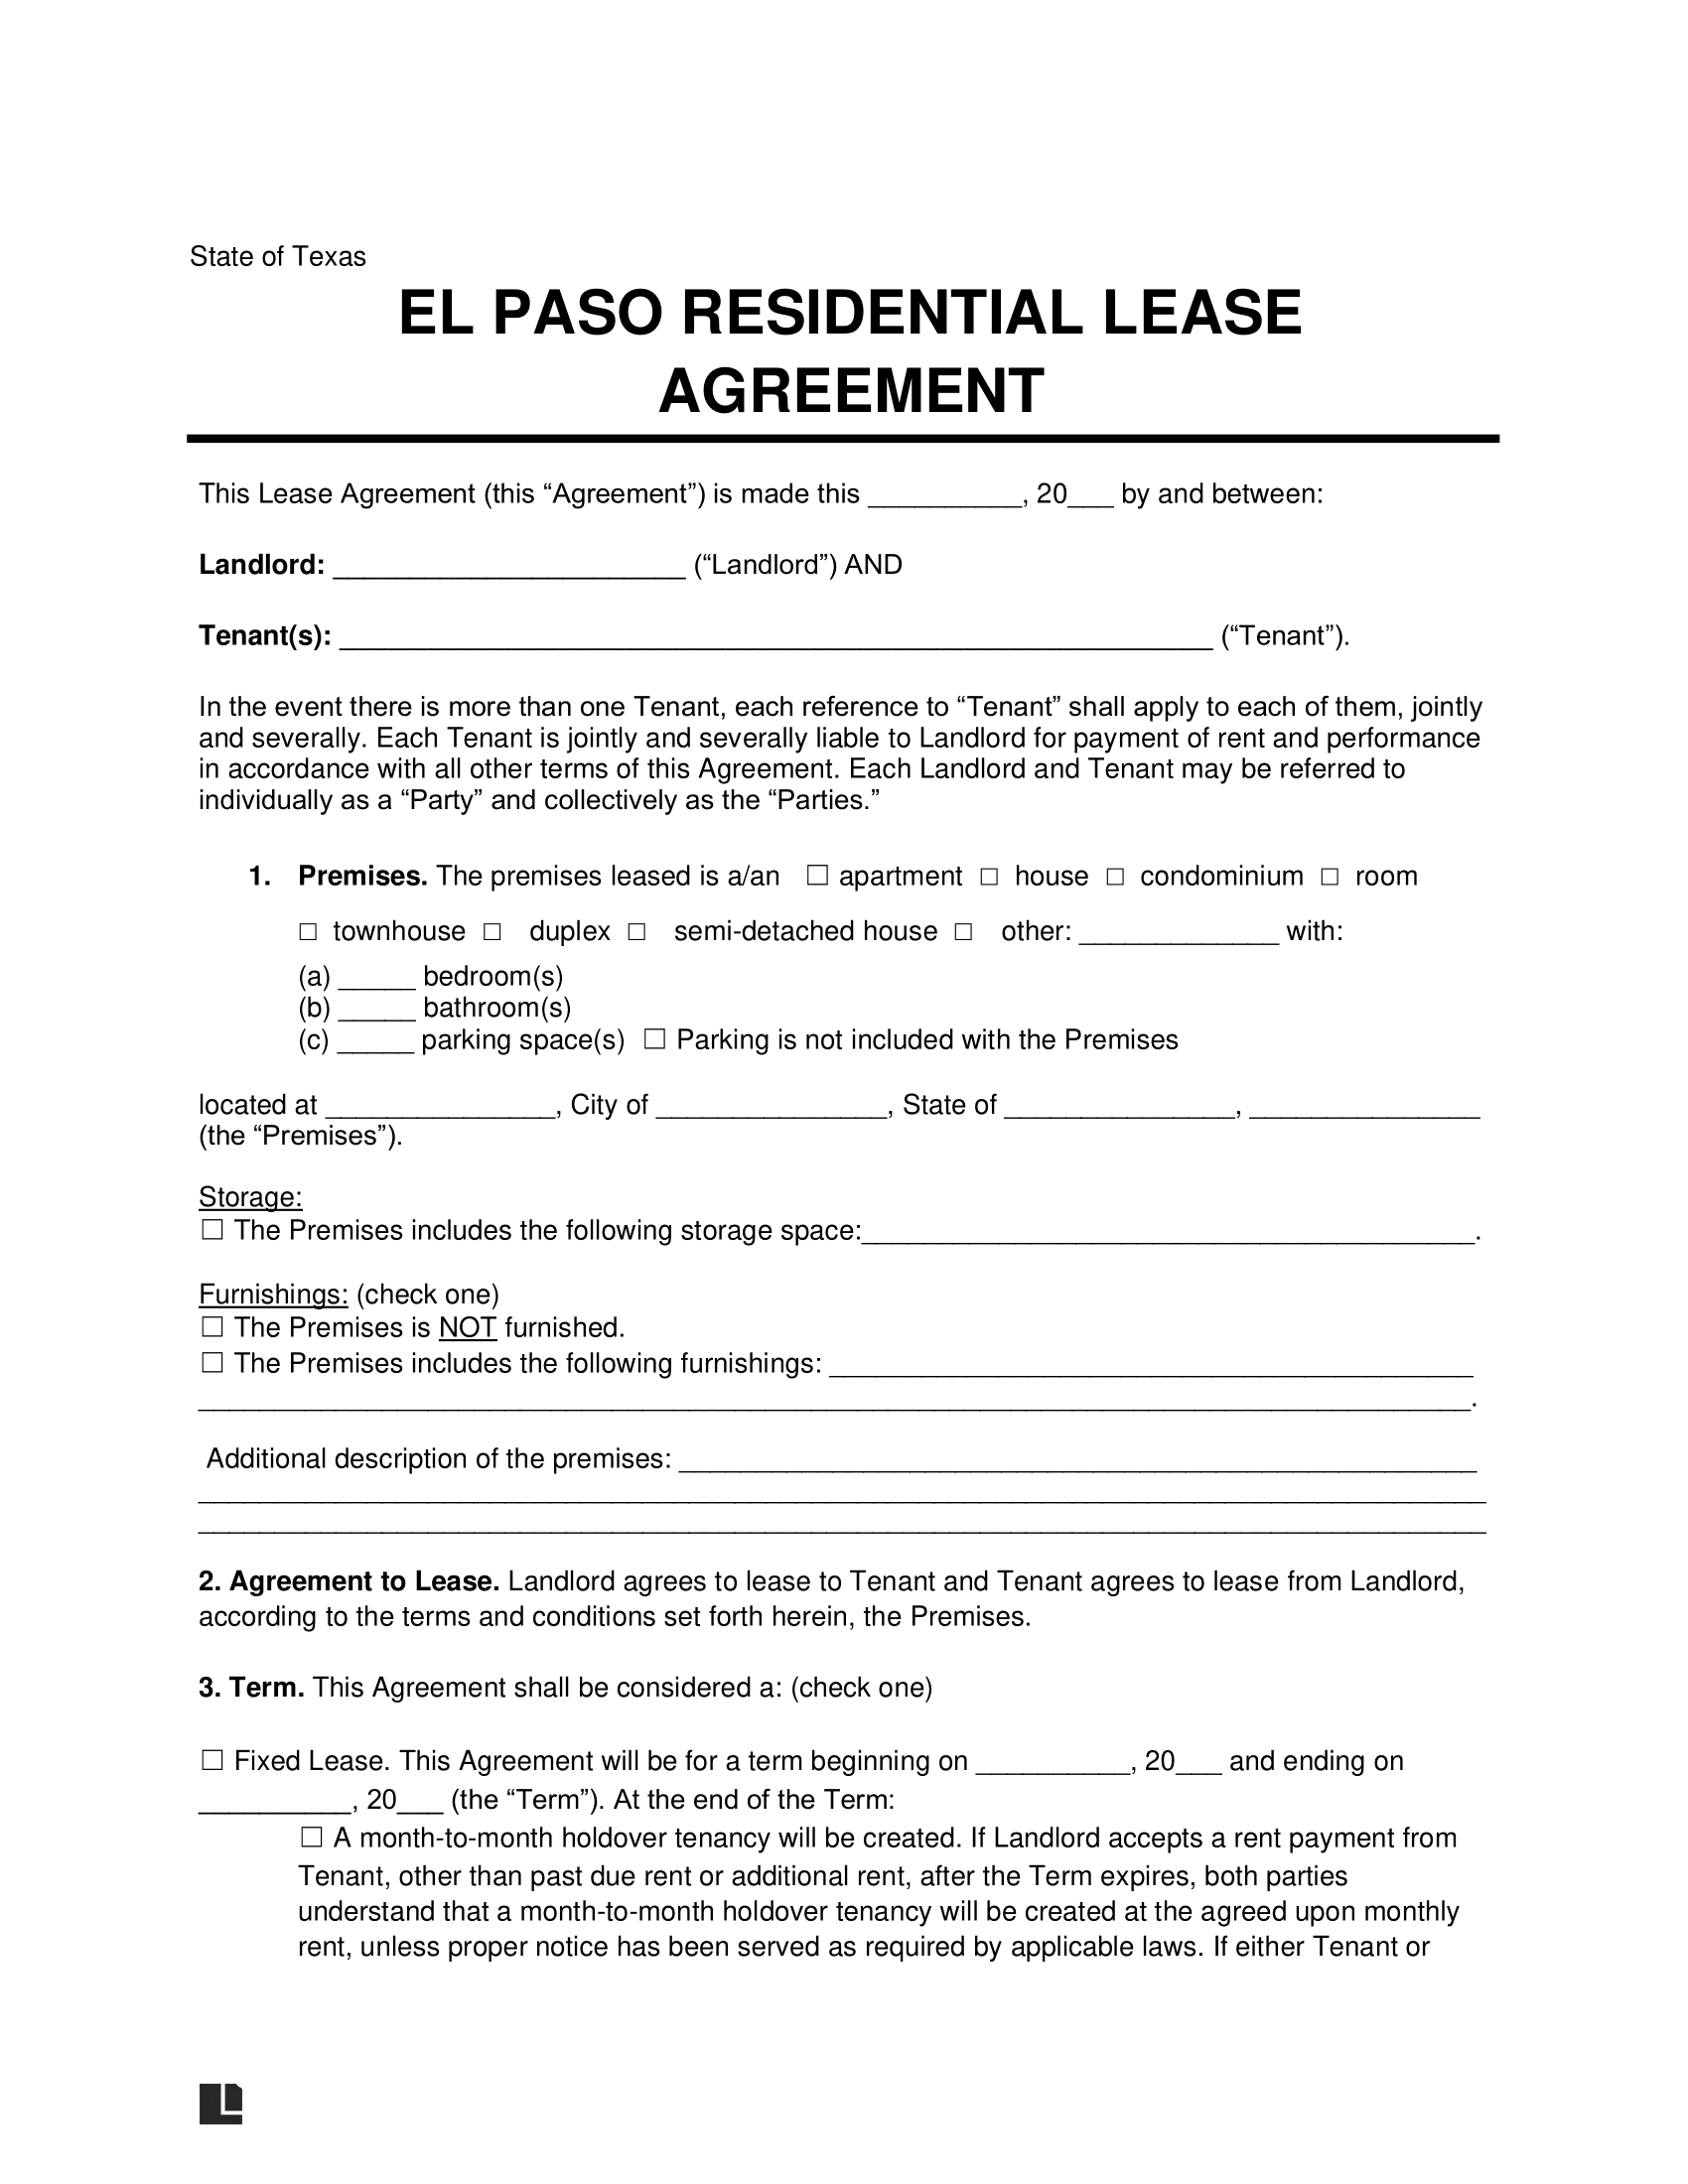 El Paso Residential Lease Agreement Template